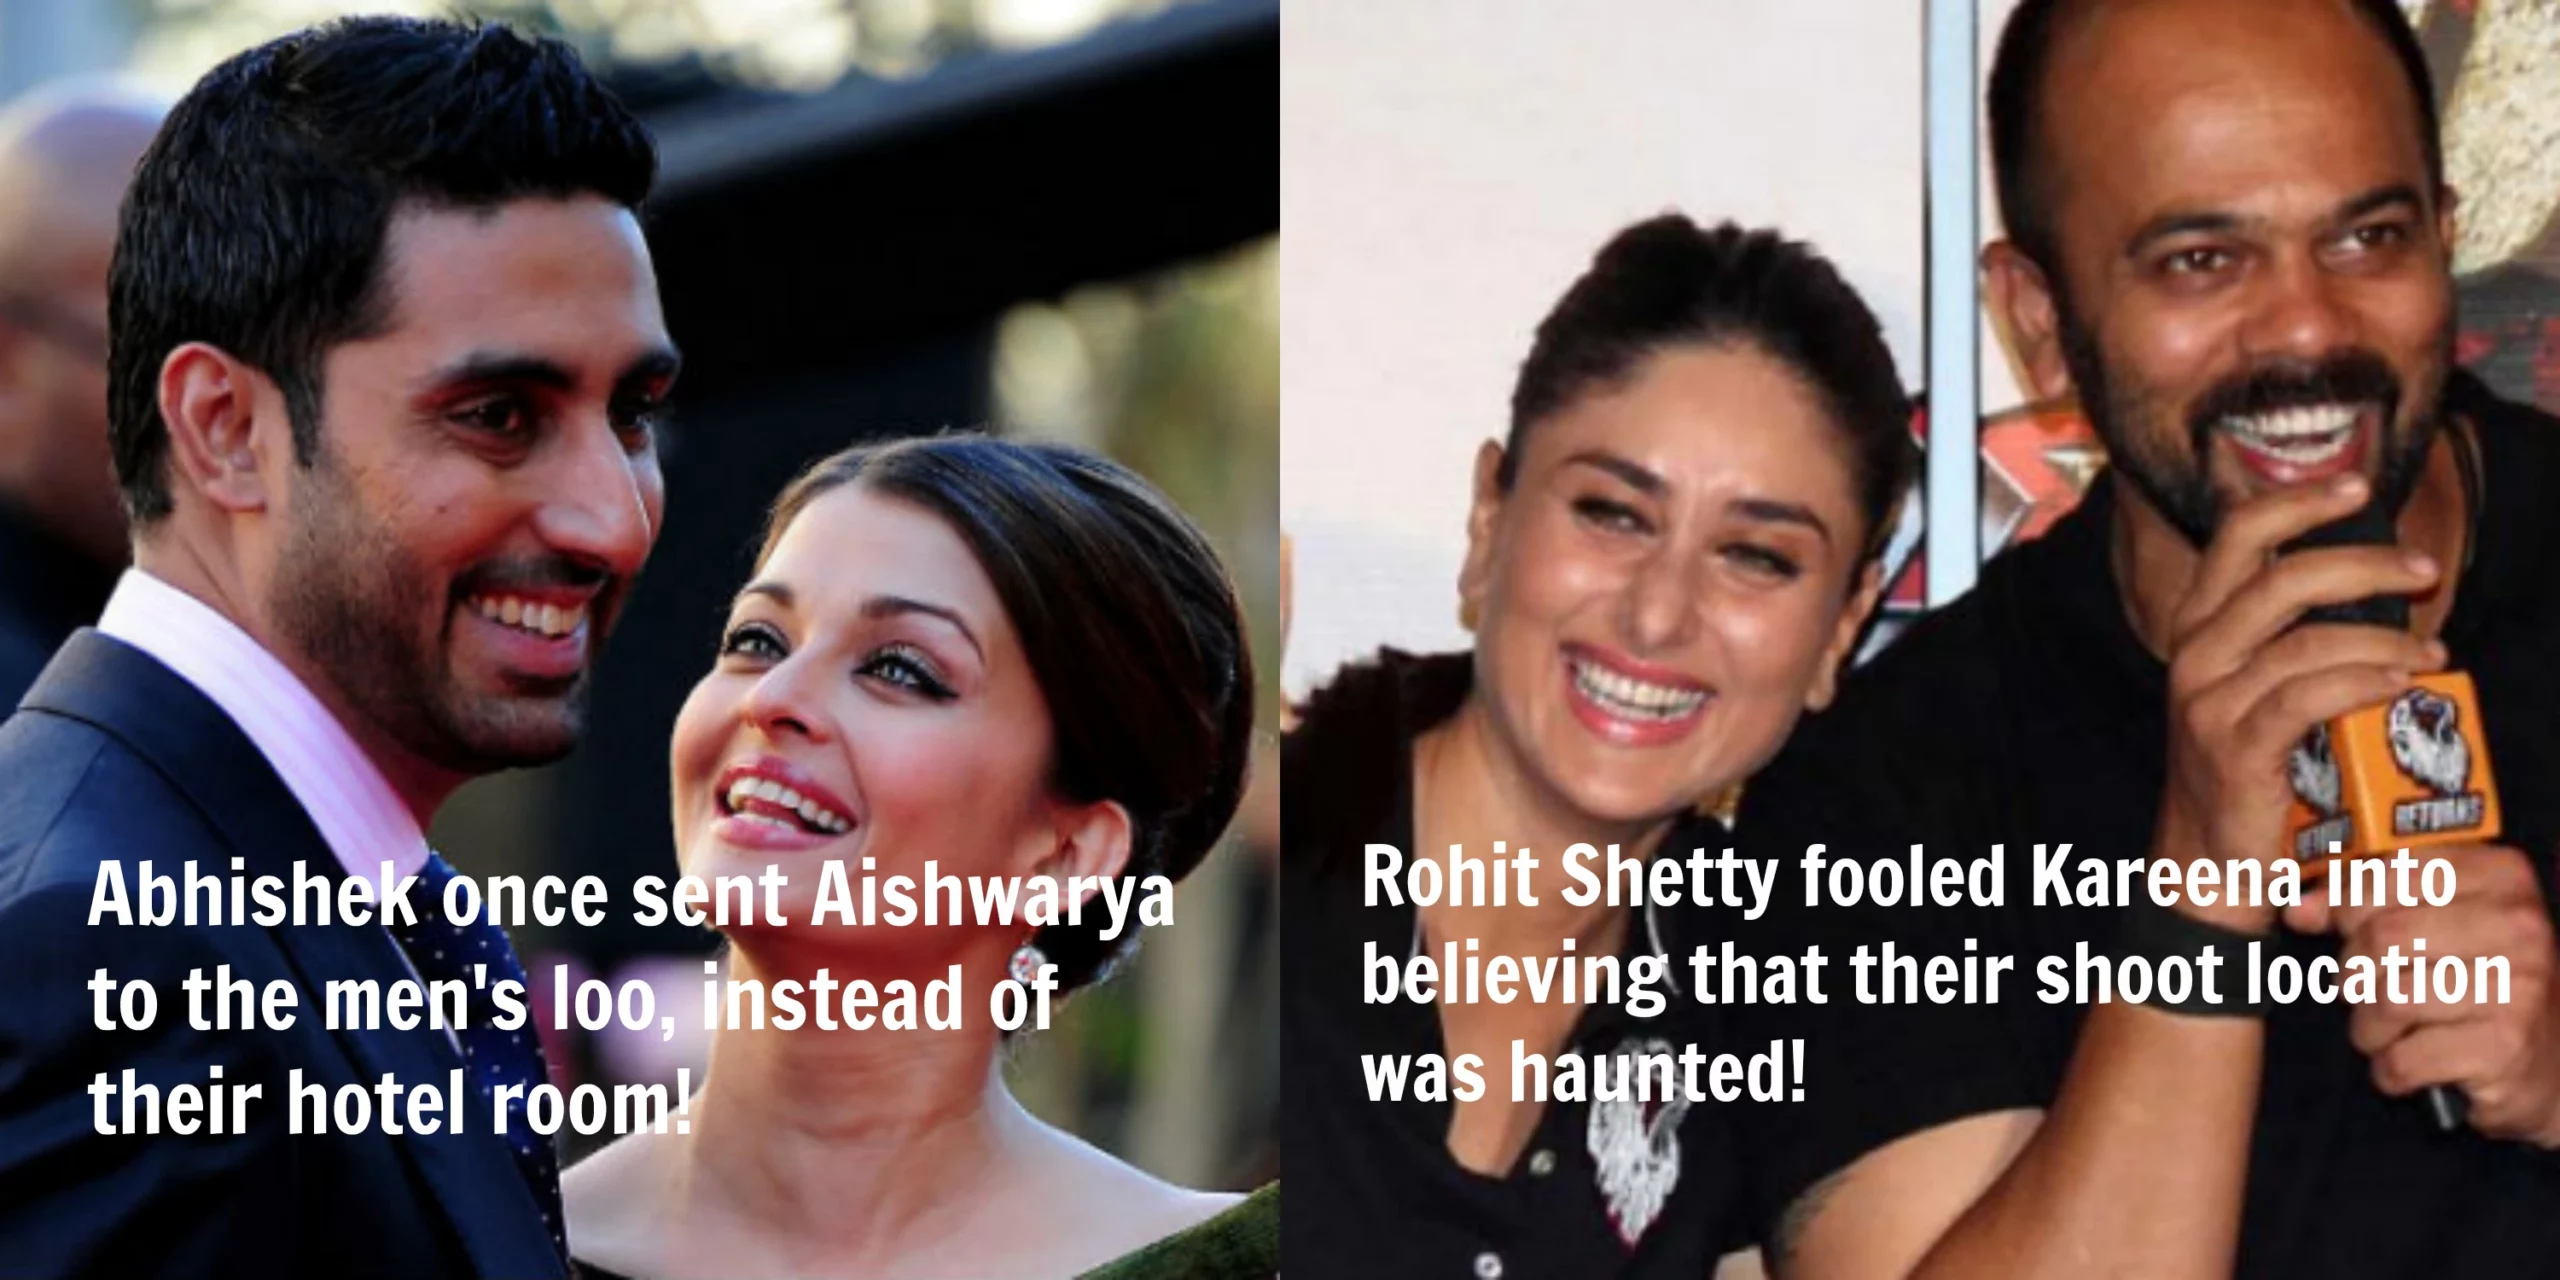 15 Times When Actors Played Pranks On The Sets of Movies And Some Were Quite Mean!